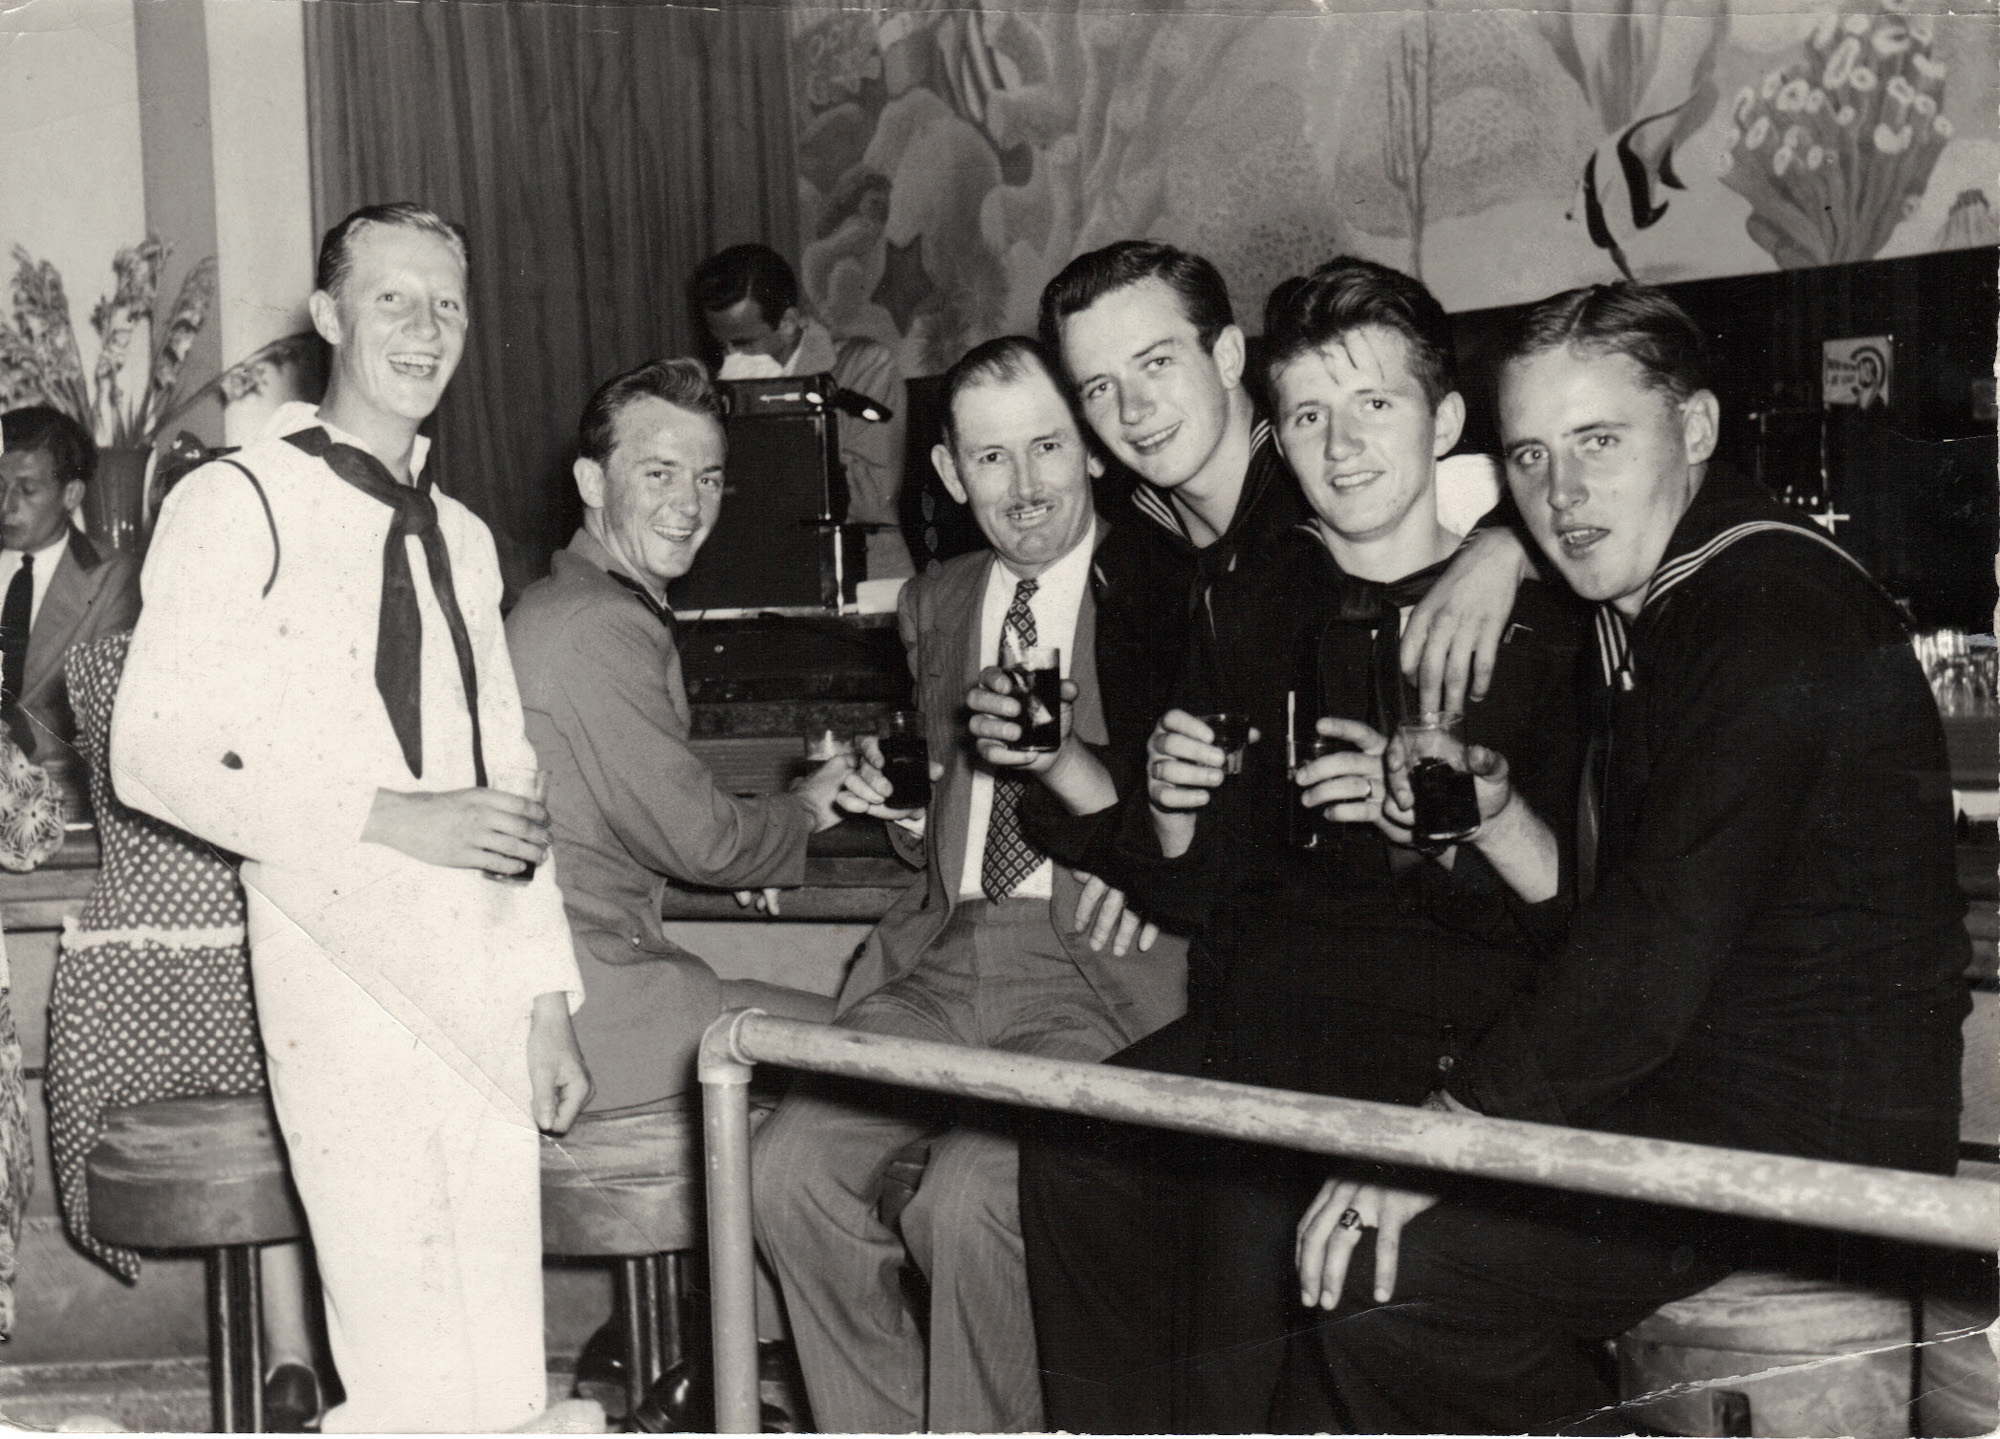 My father (on left) at some club in Florida before shipping out to the Pacific during WWII. He was on the USS Allentown. View full size.